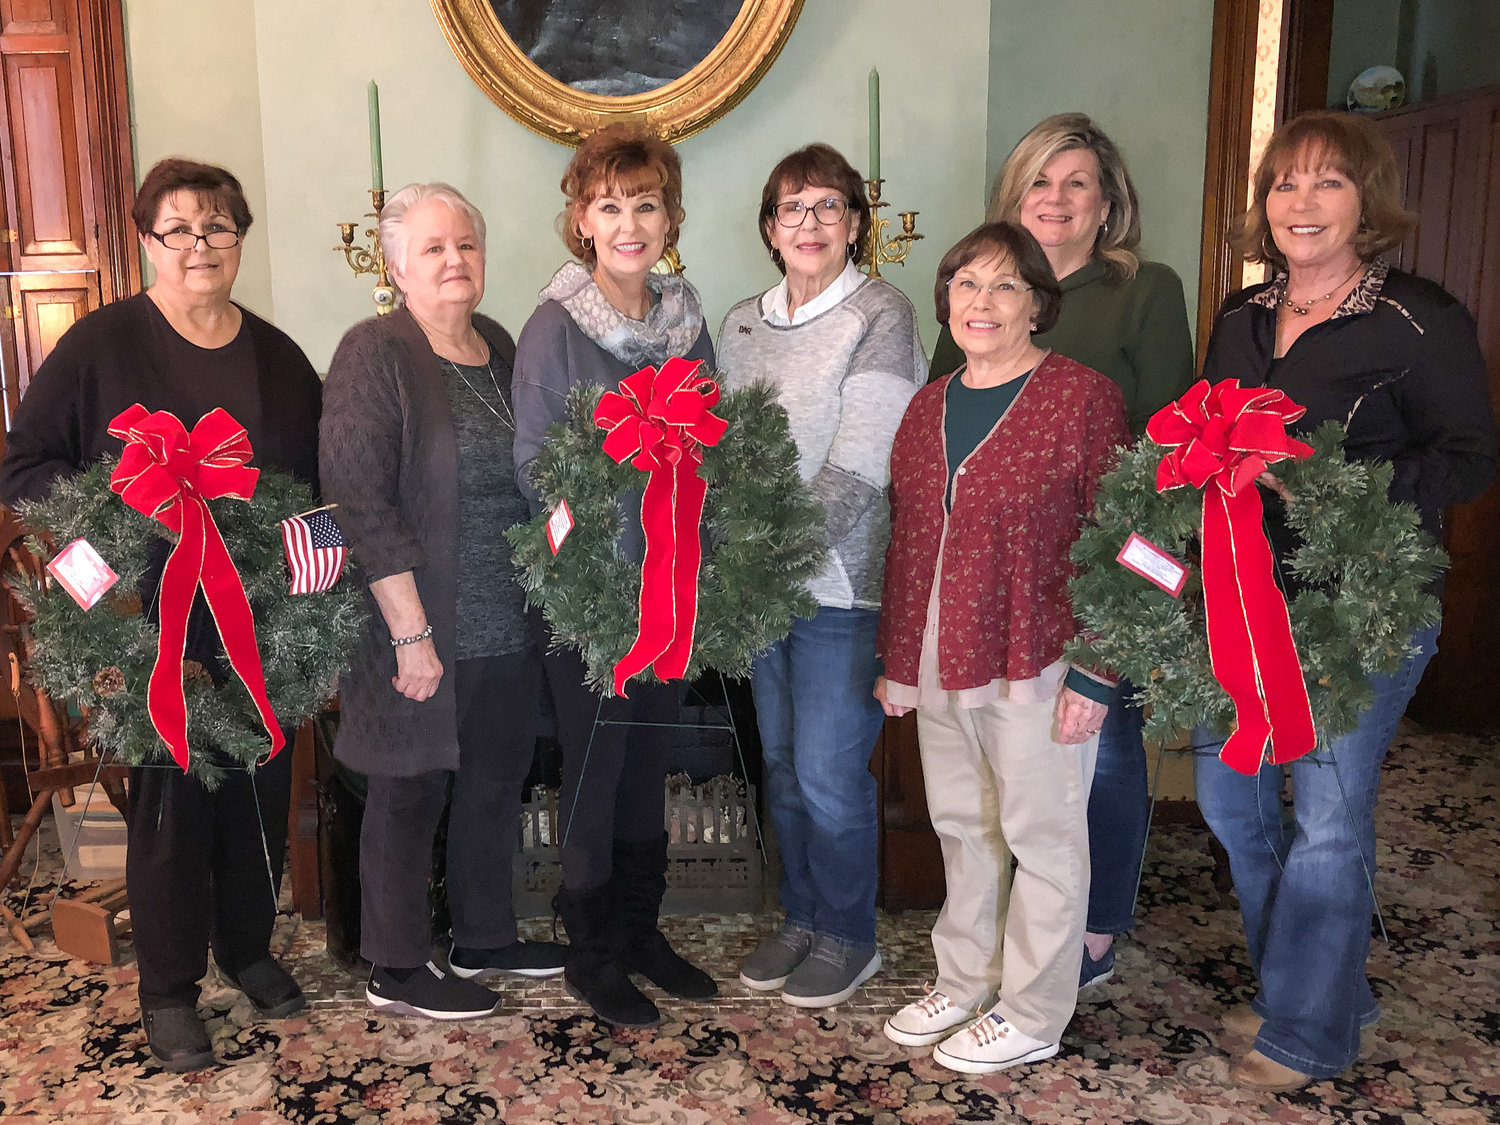 Members of the Dorothy Q Chapter of NSDAR recently decorated the chapter house inside and out. Members pose while holding three of the 19 Revolutionary War Patriot wreaths that are placed each year on graves of those patriots buried within Montgomery County.